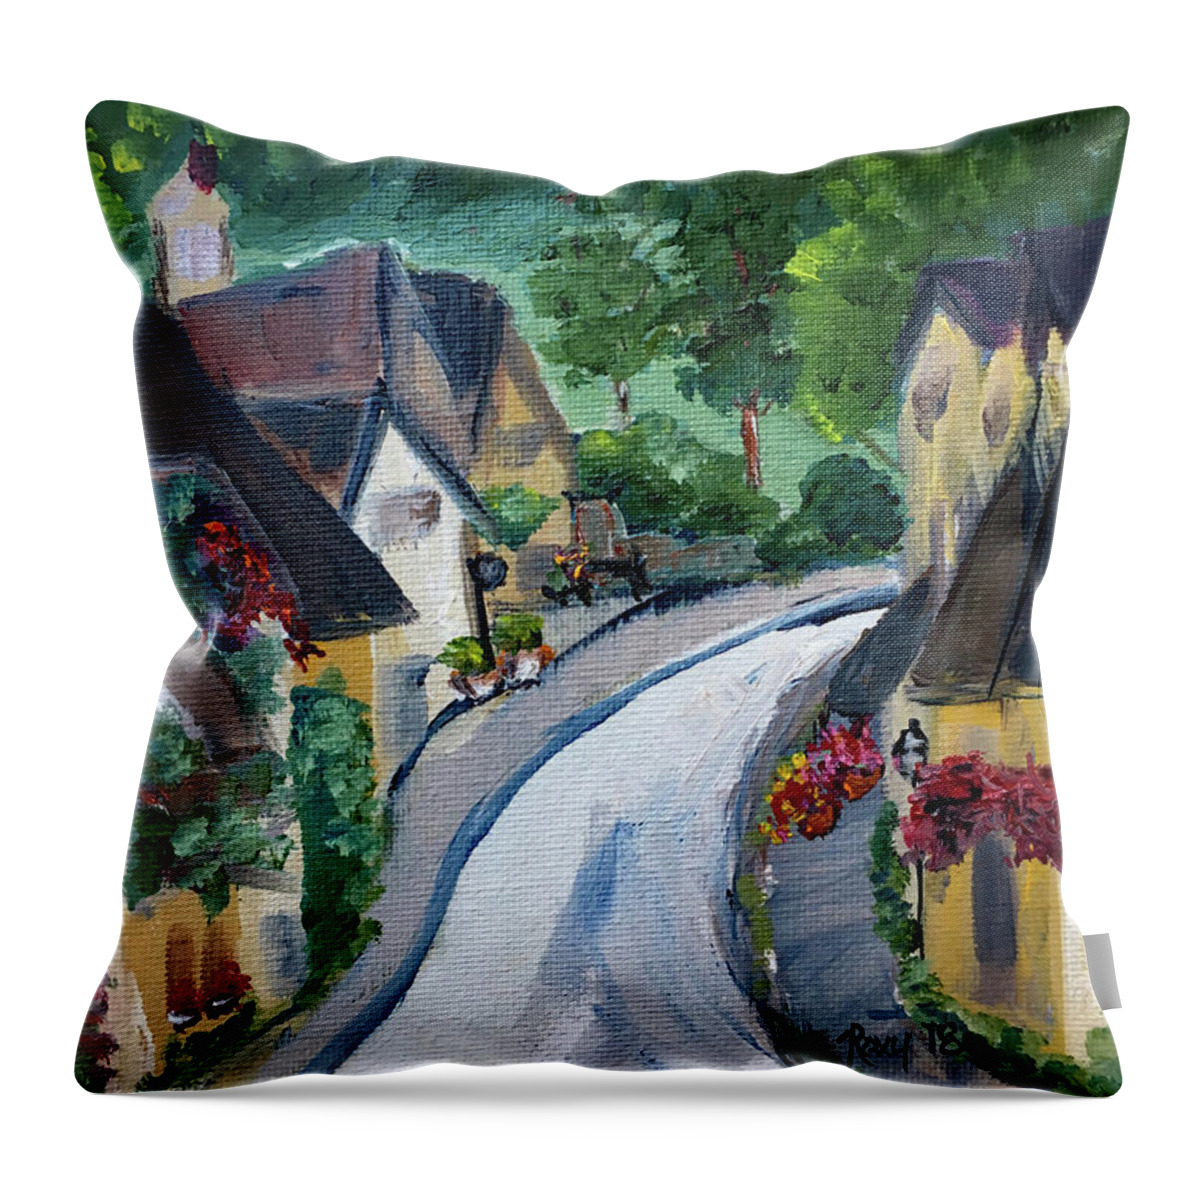 Castle Combe Throw Pillow featuring the painting Castle Combe view from Town Square by Roxy Rich